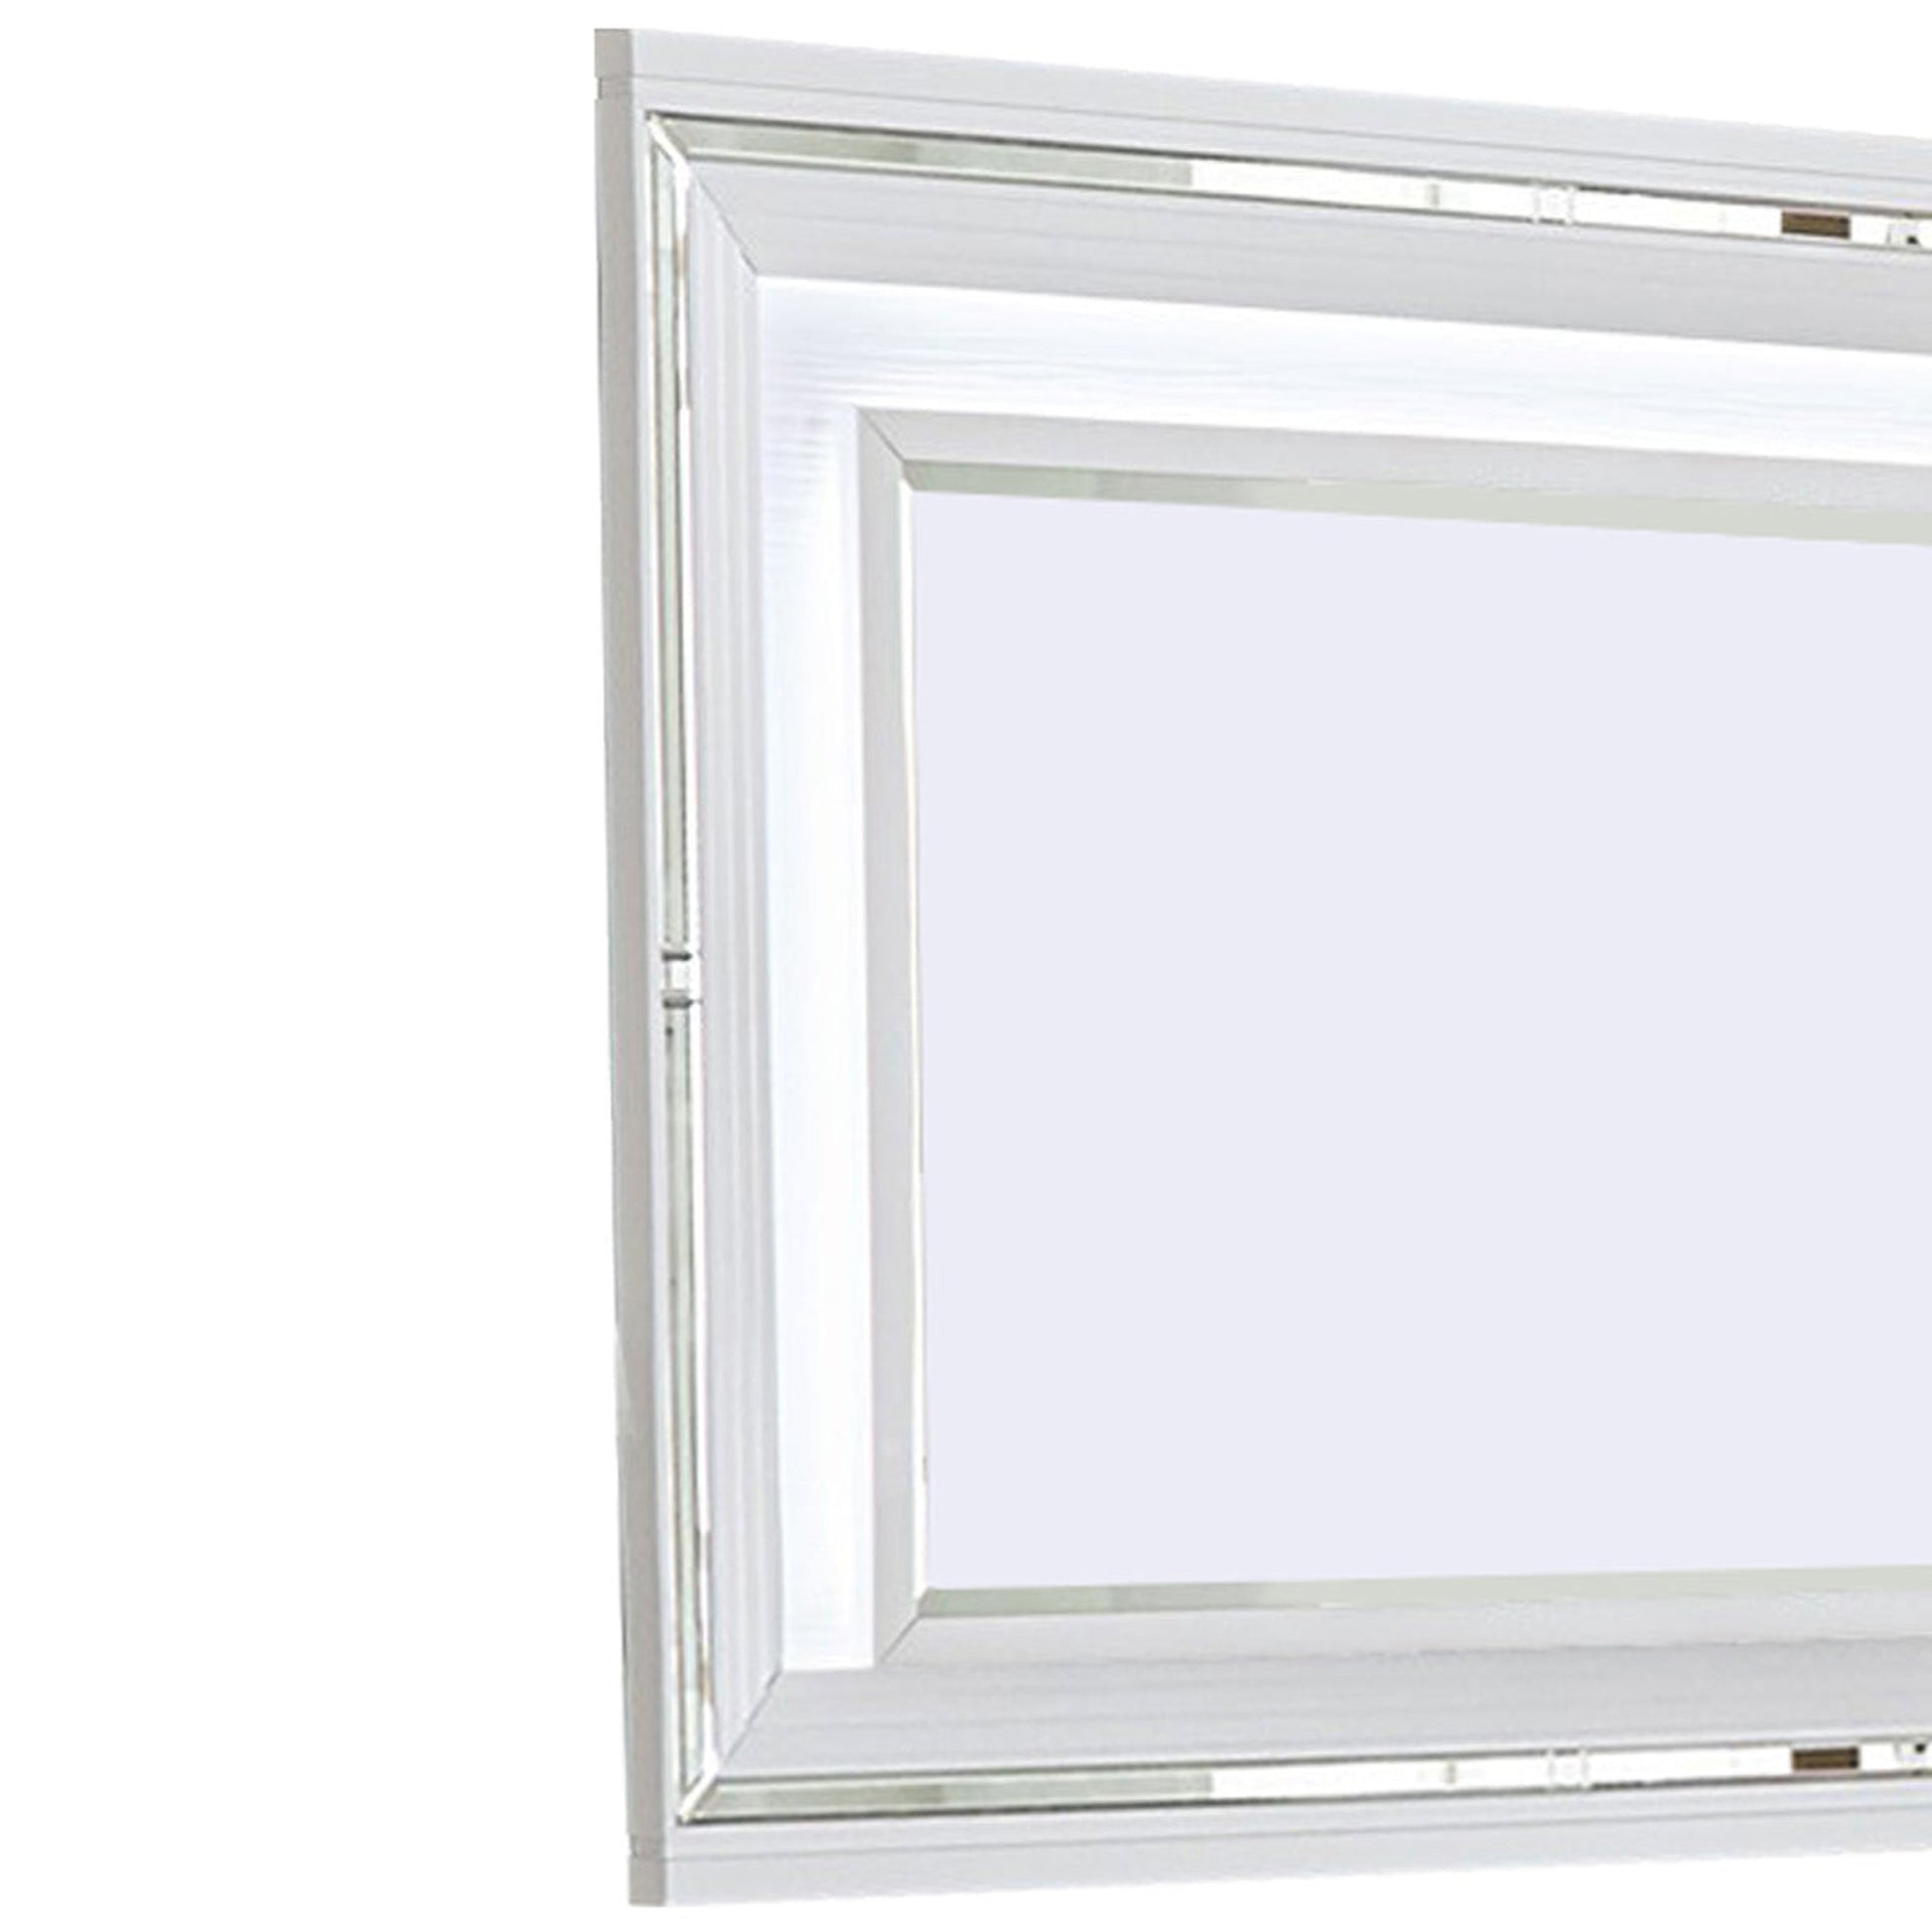 Benzara White Wooden Frame Mirror With LED and Mirror Trim Accents